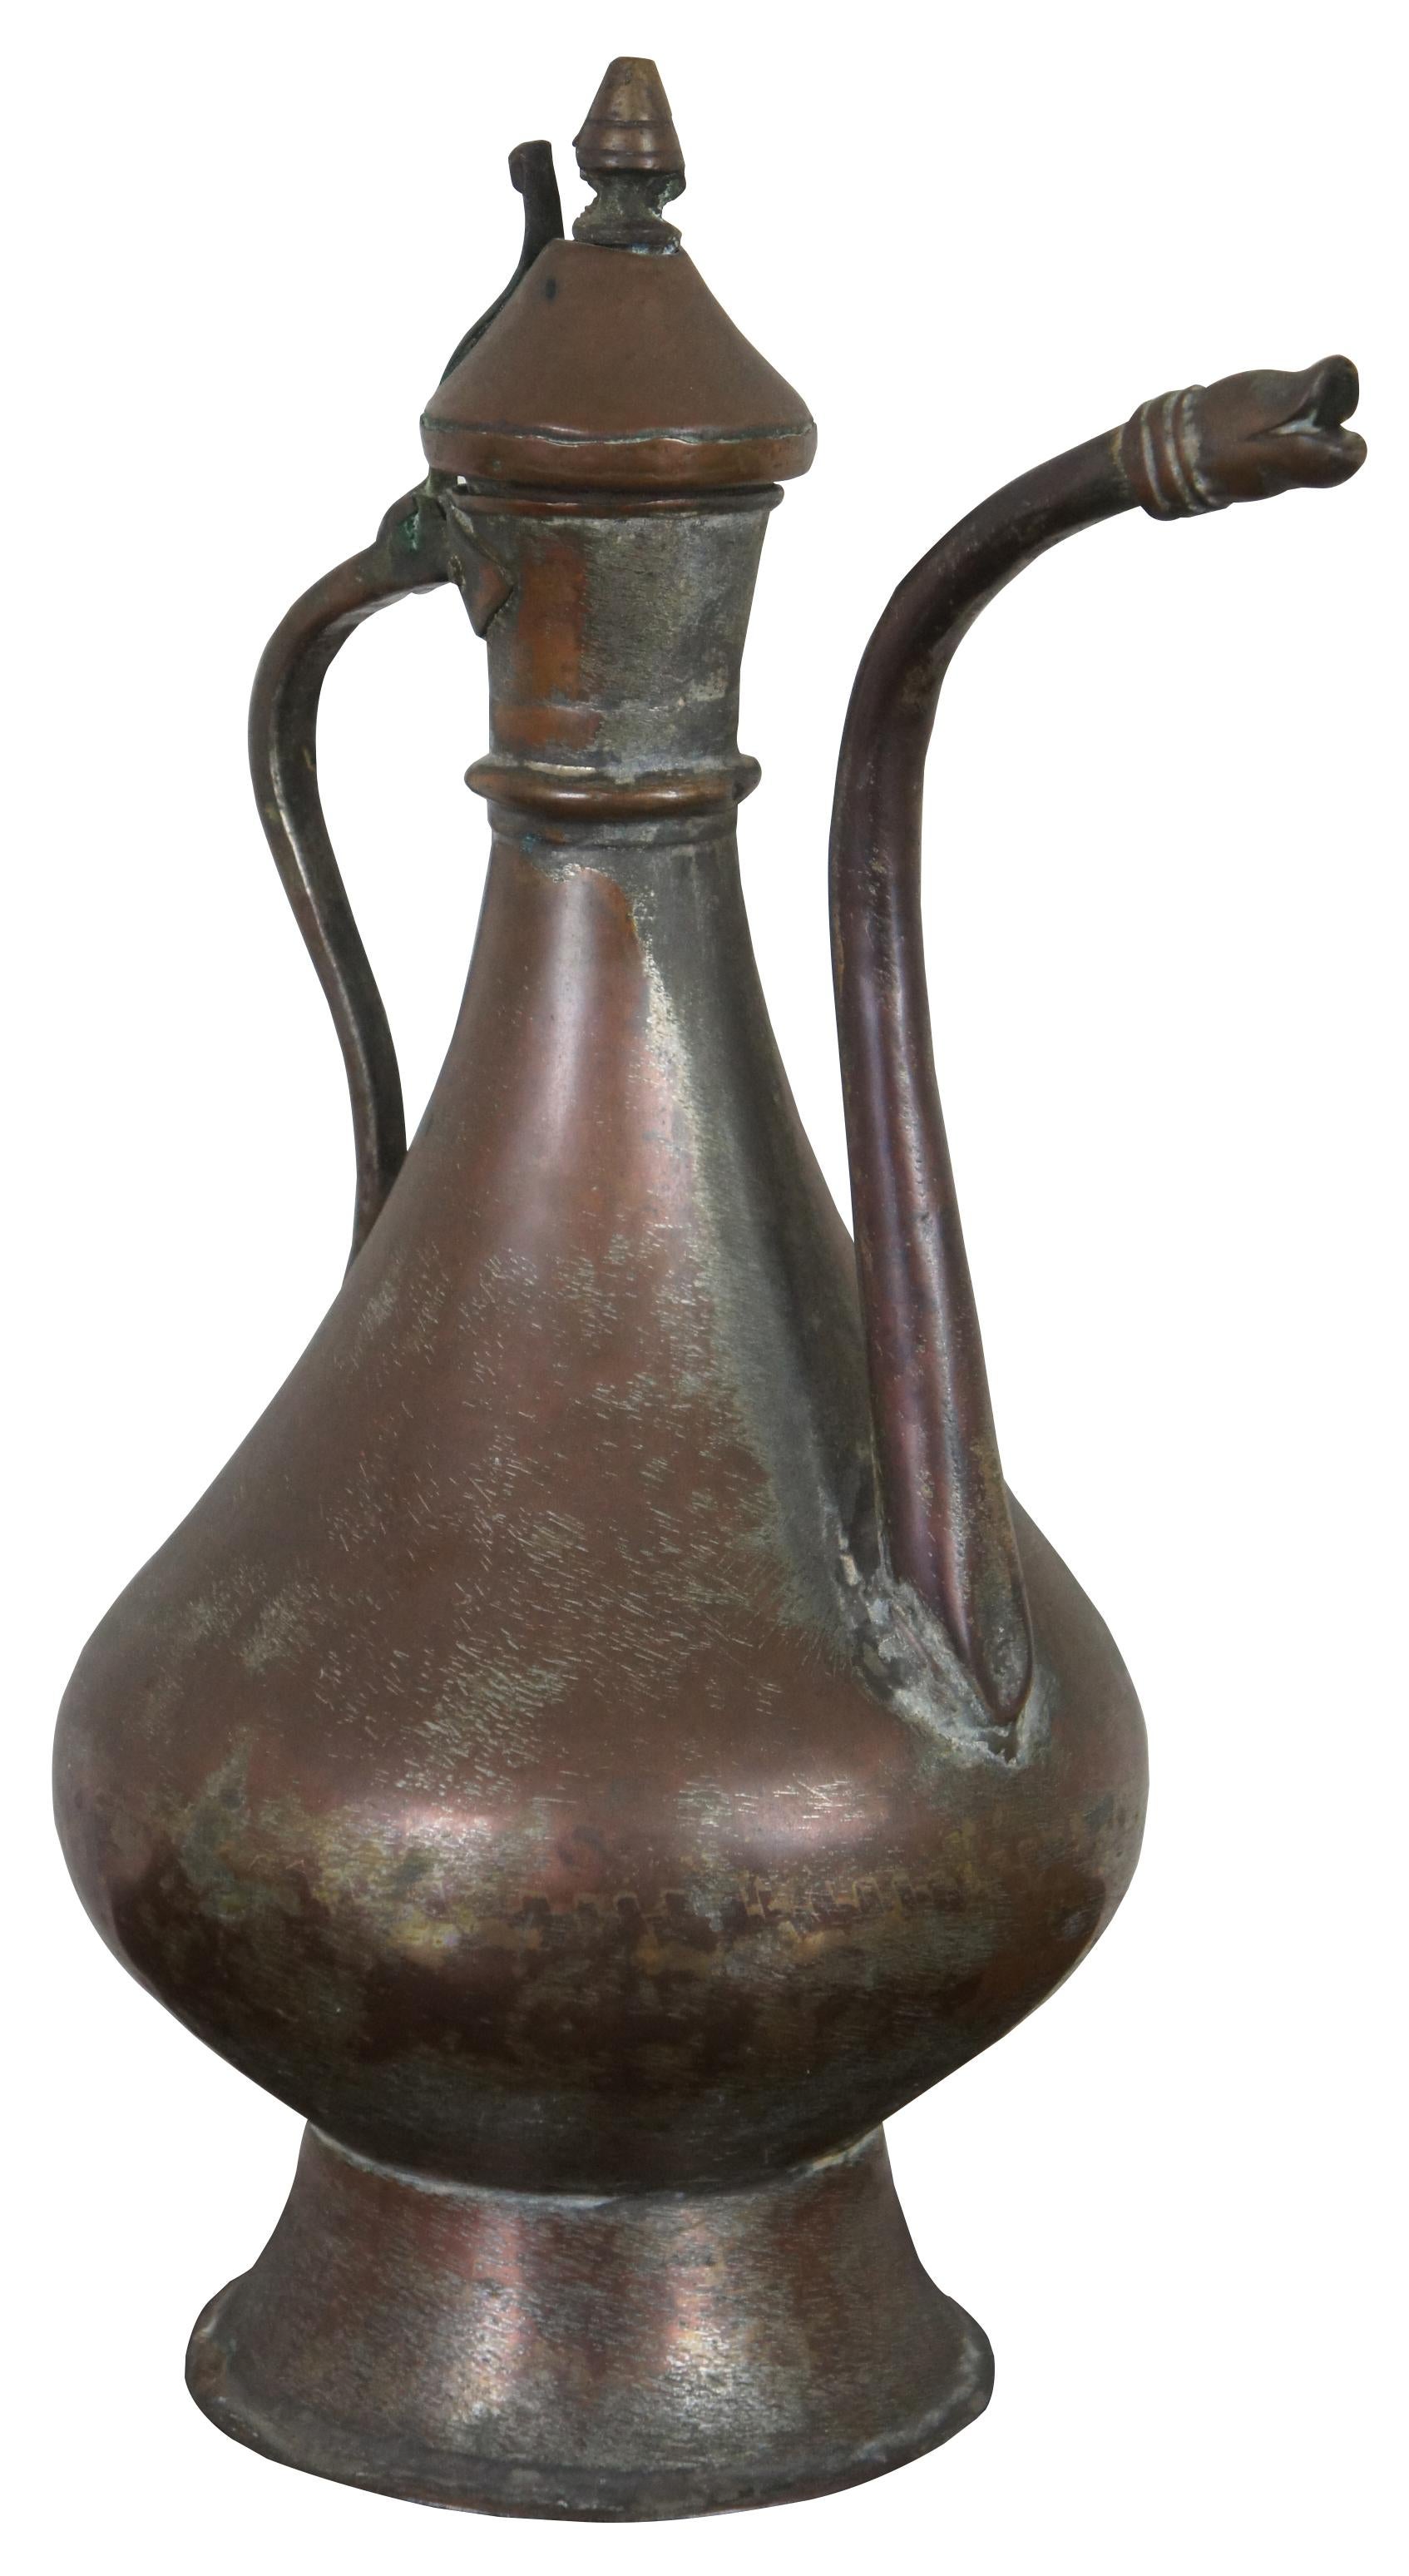 Antique dovetailed hammered copper pitcher / ewer / carafe with hinged lid and goose neck spout. Measures: 15